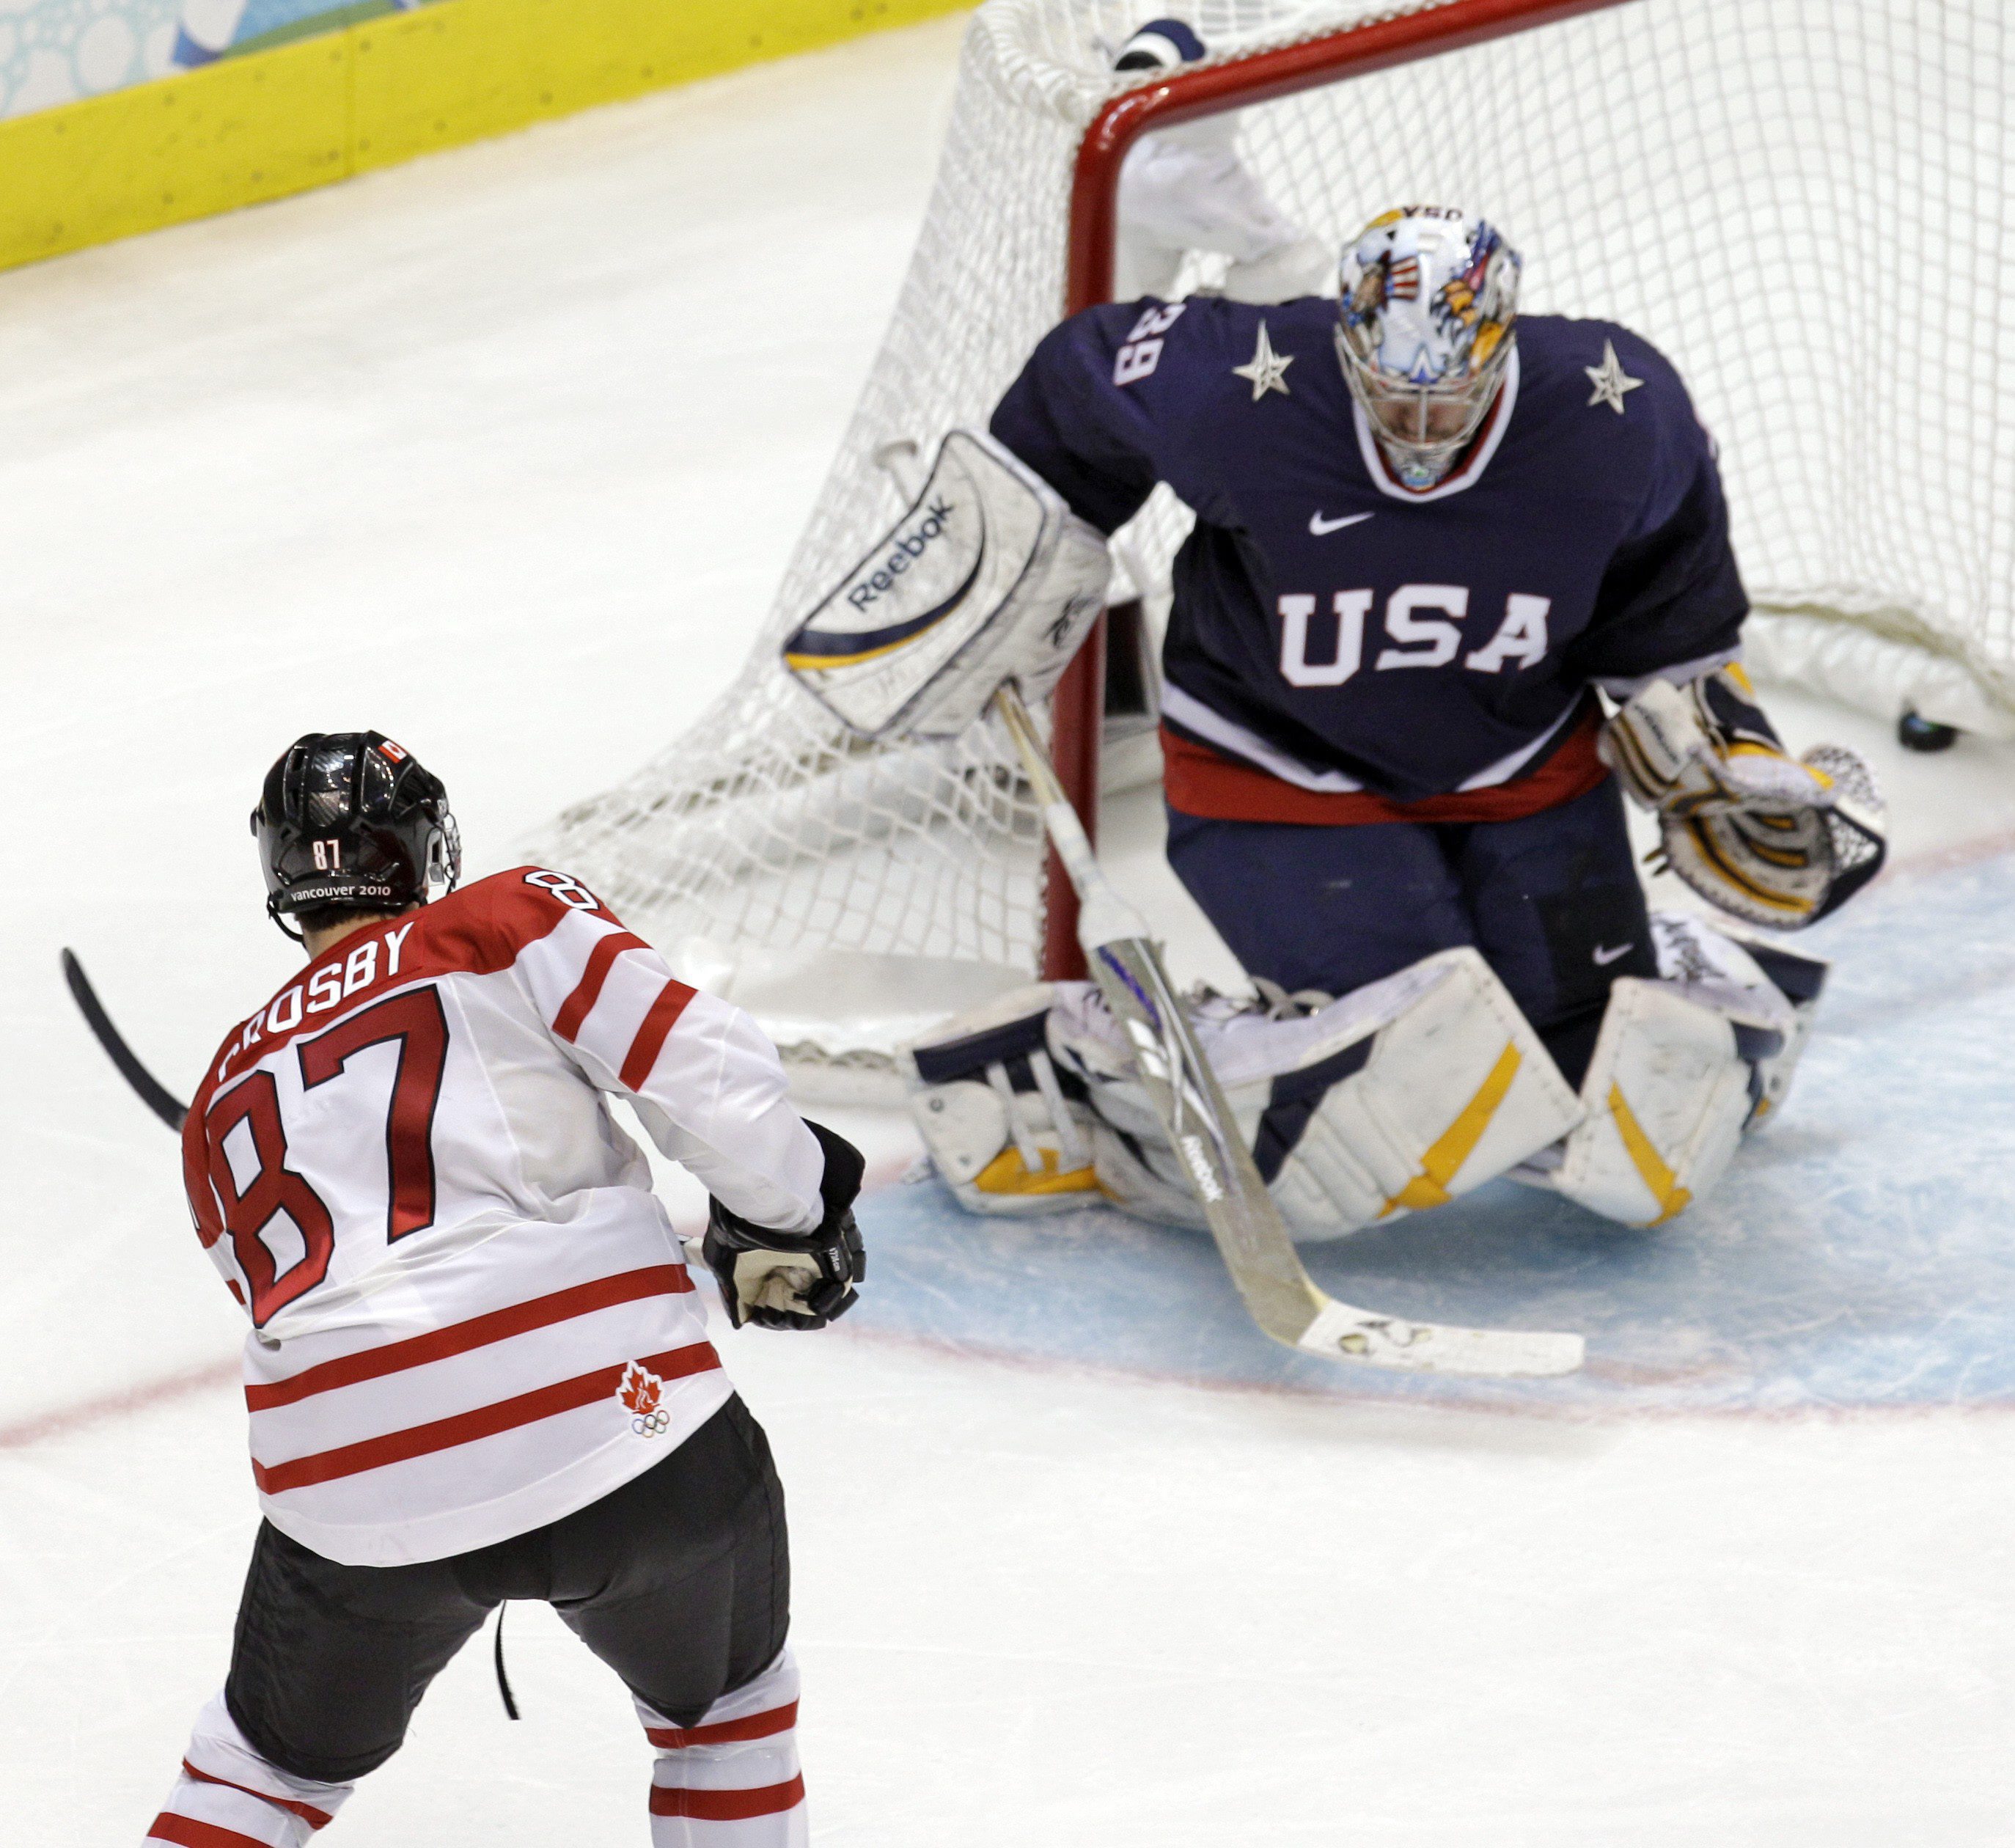 Sidney Crosby scores a goal against the USA